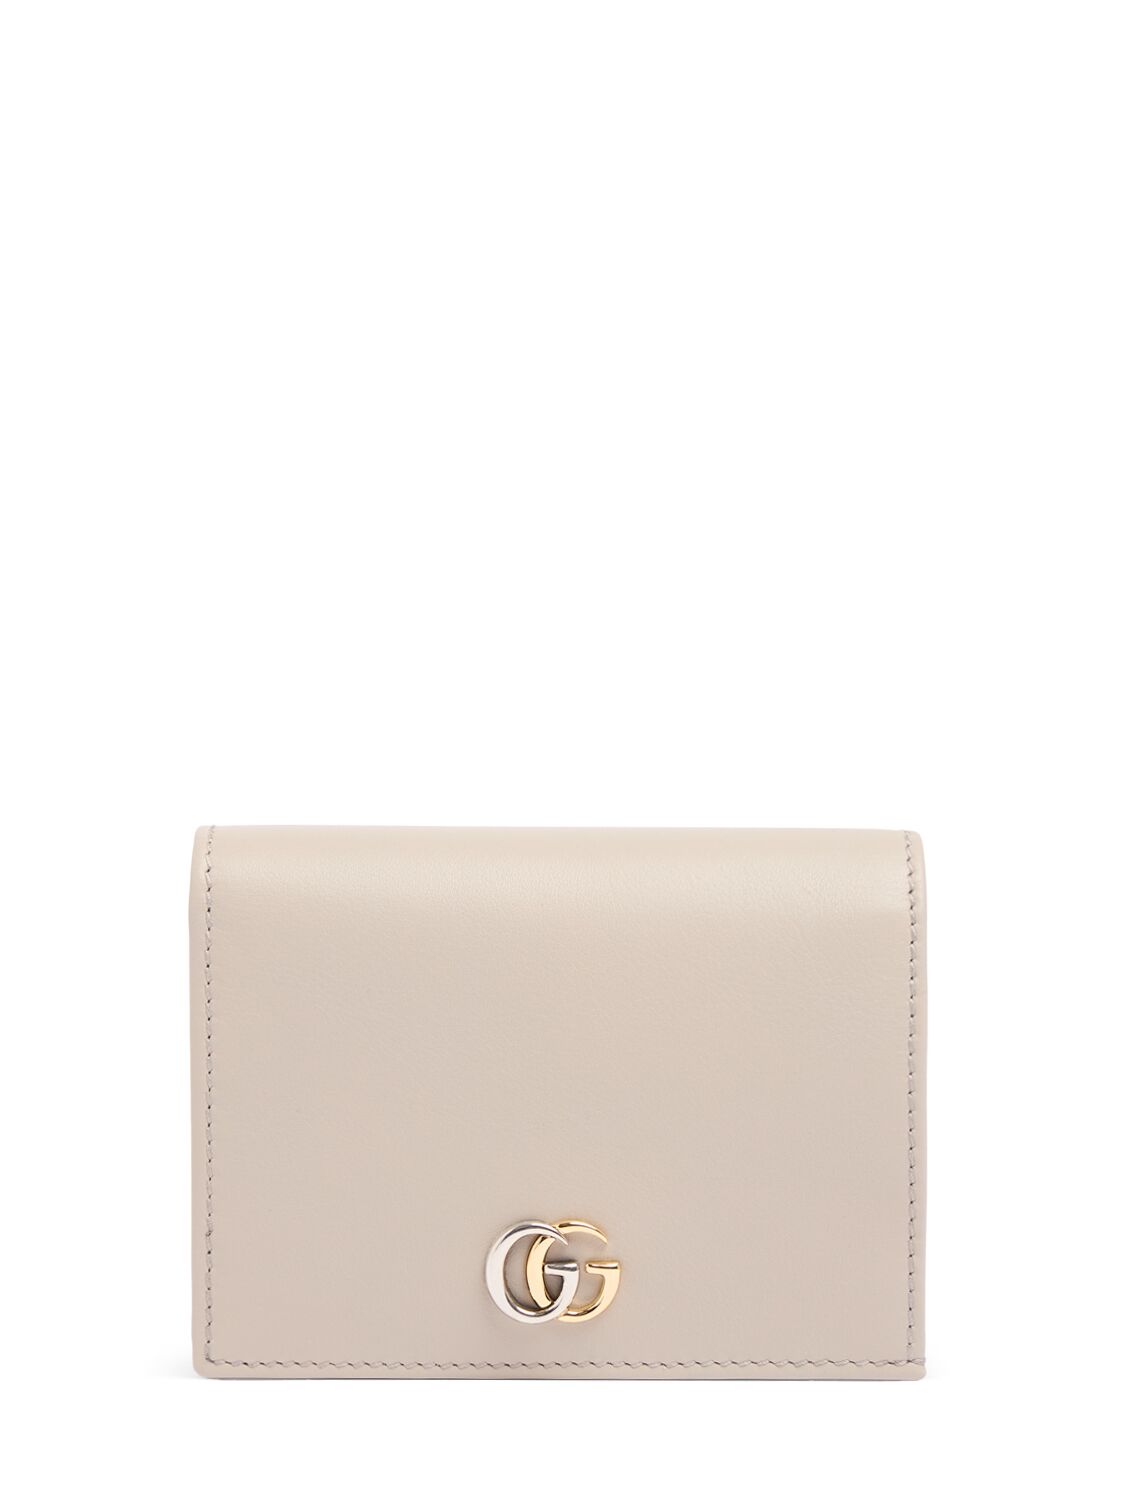 Gucci Petite Marmont Leather Card Case In Sphinx